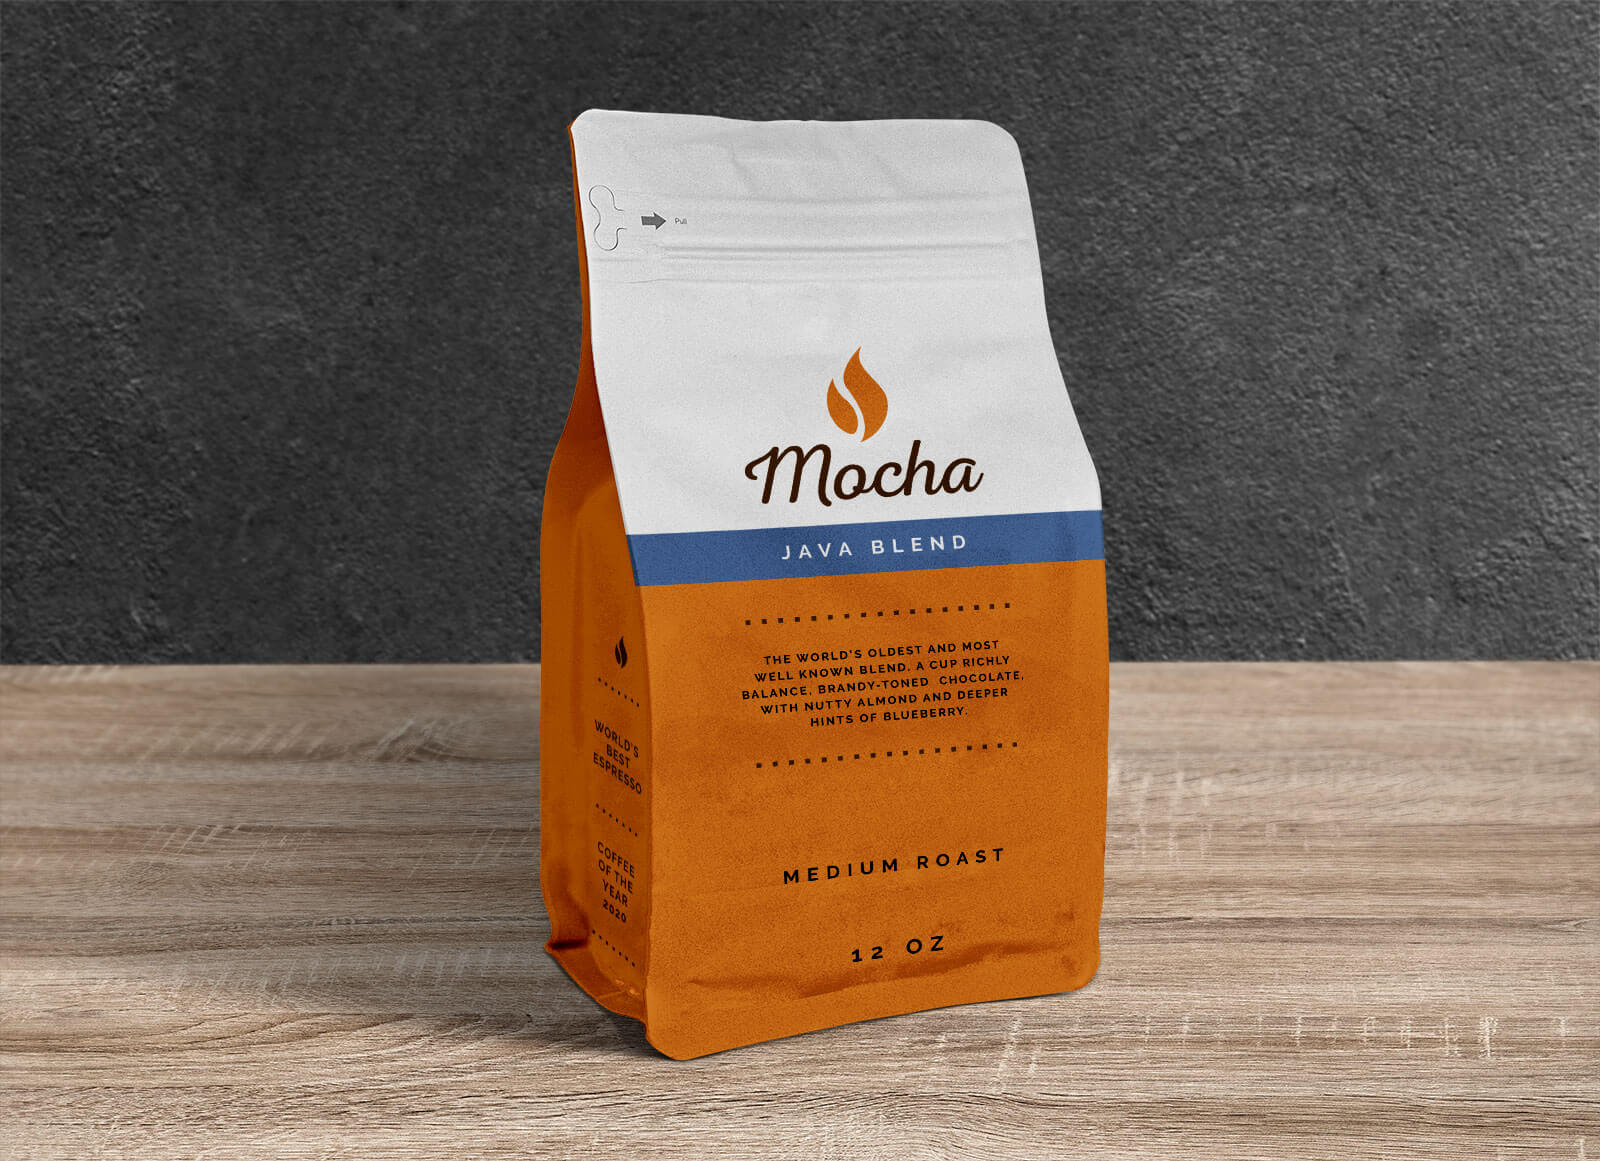 Coffee Pouch Packaging Bag Mockup | Free PSD Templates